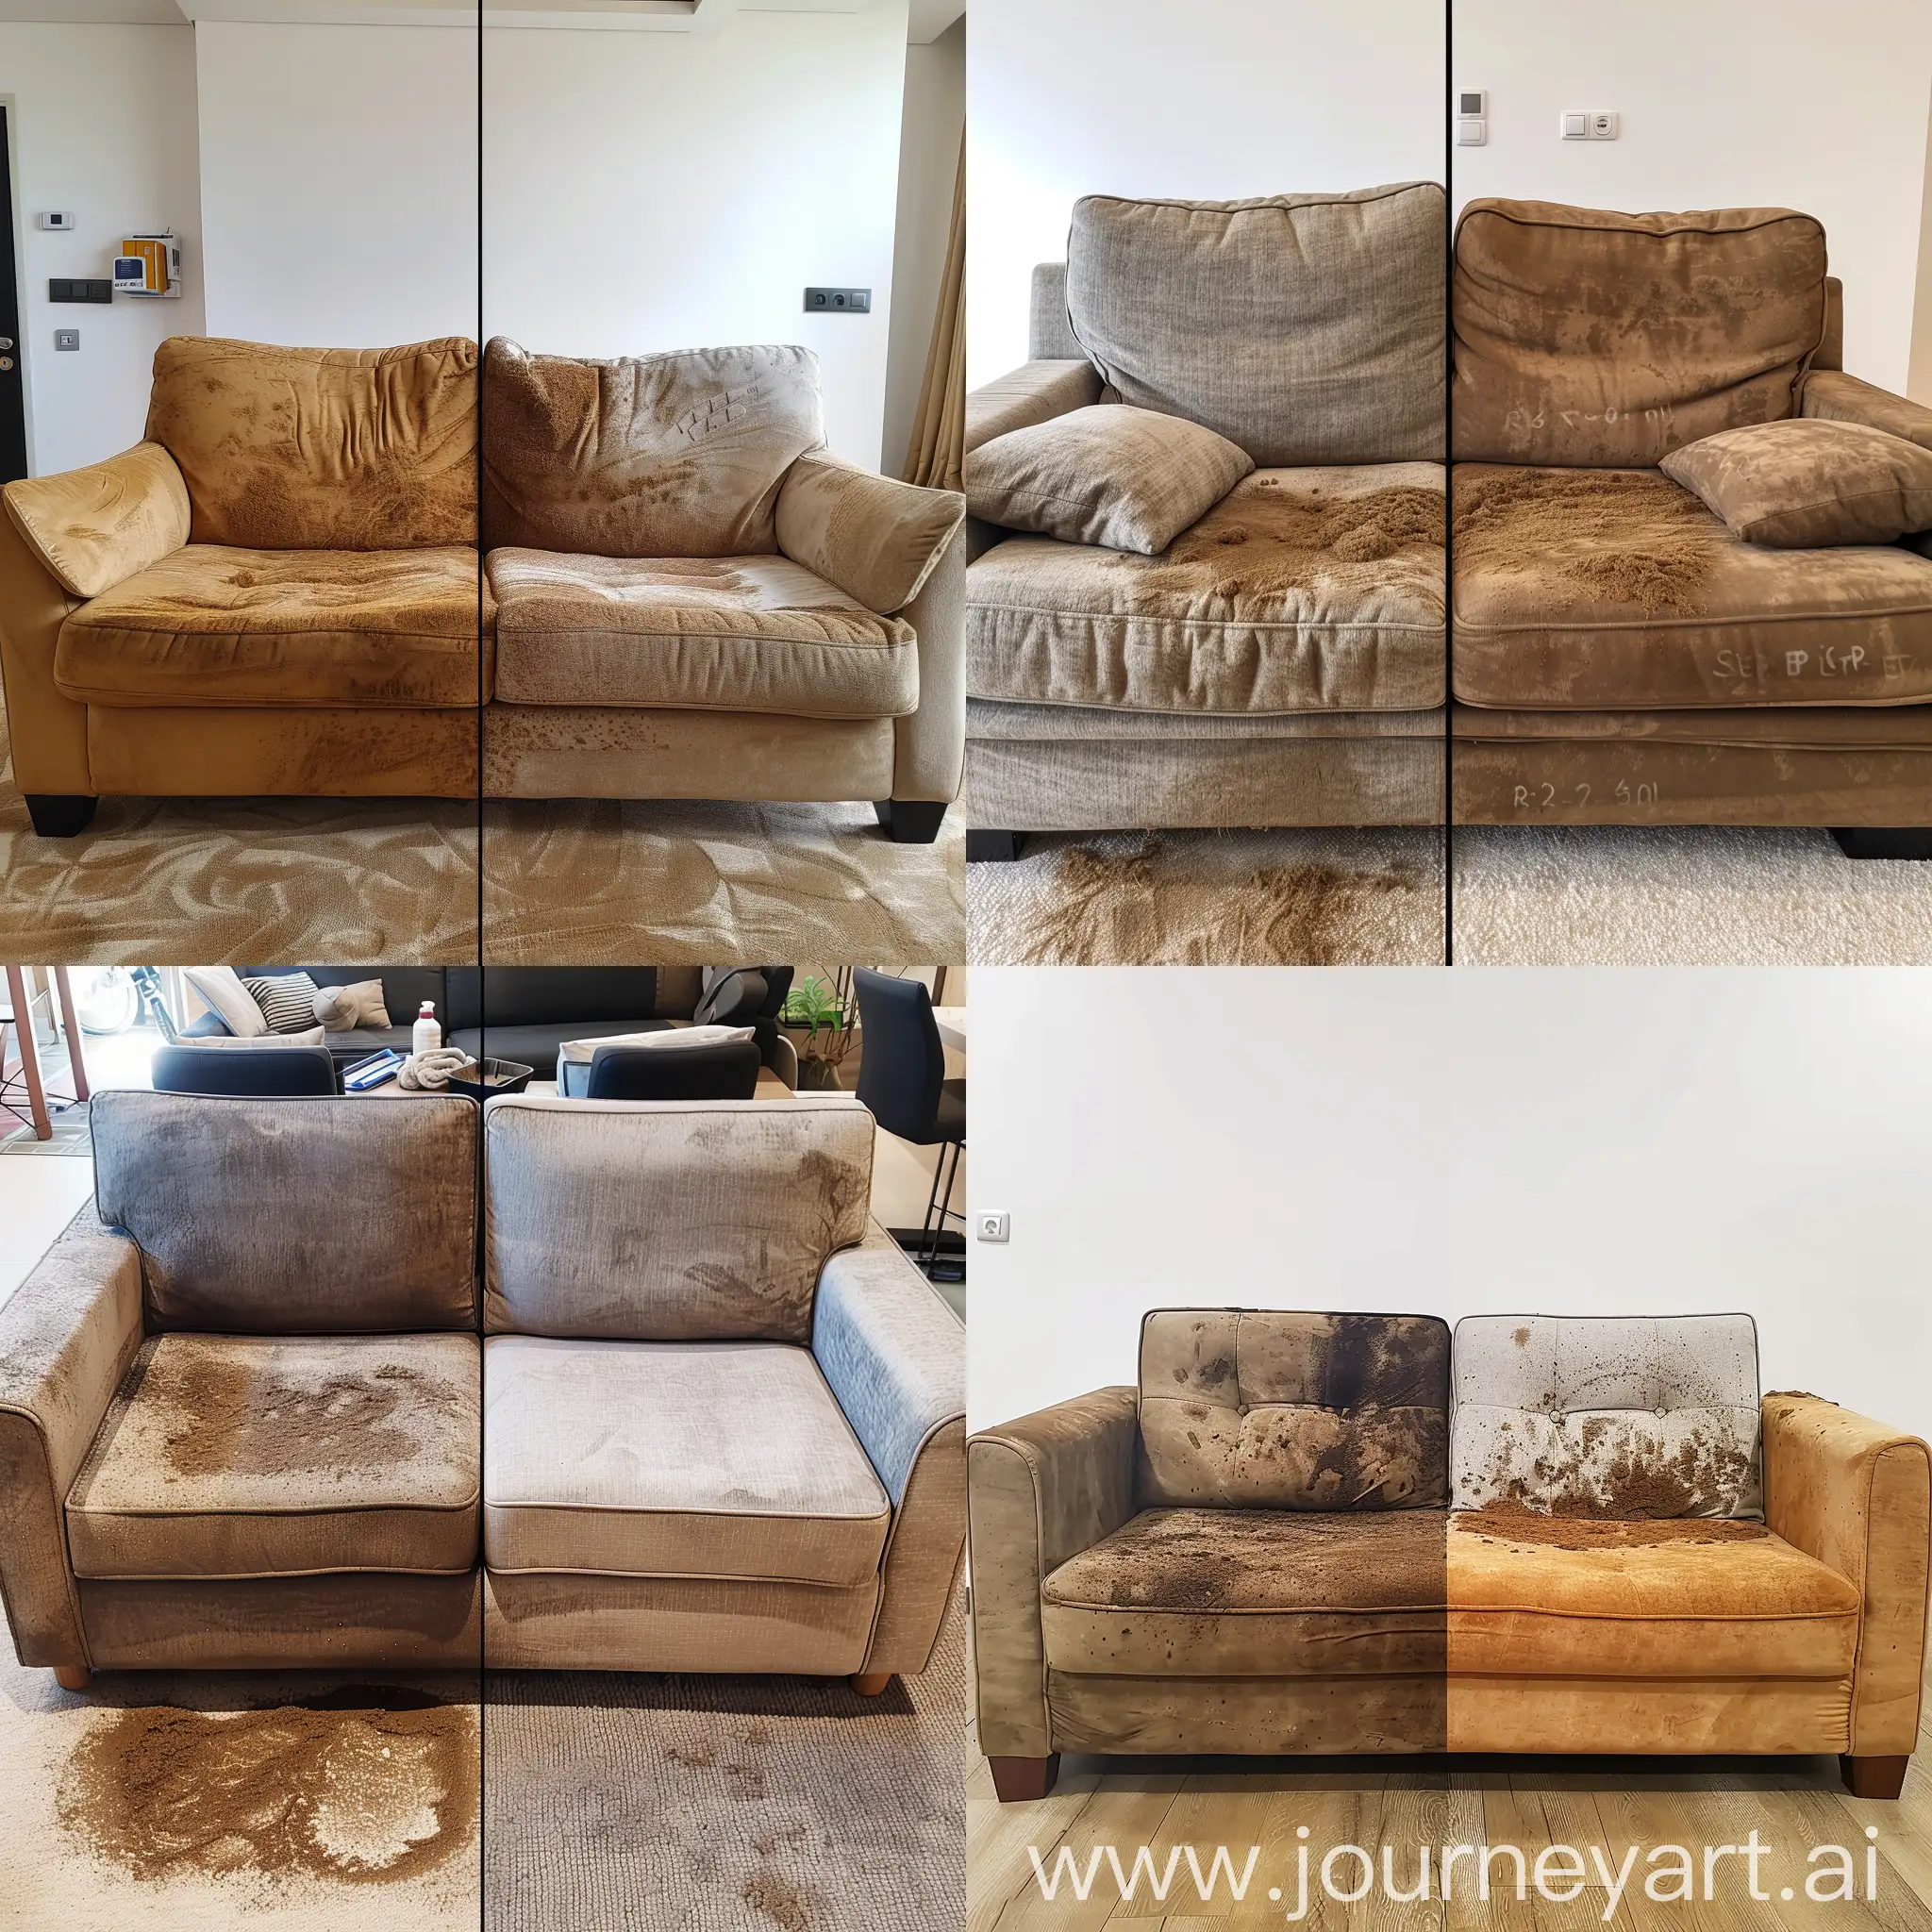 Create  a sofa cleaning with one side very dirty With mires, bacteria and the other very clean Like before and after